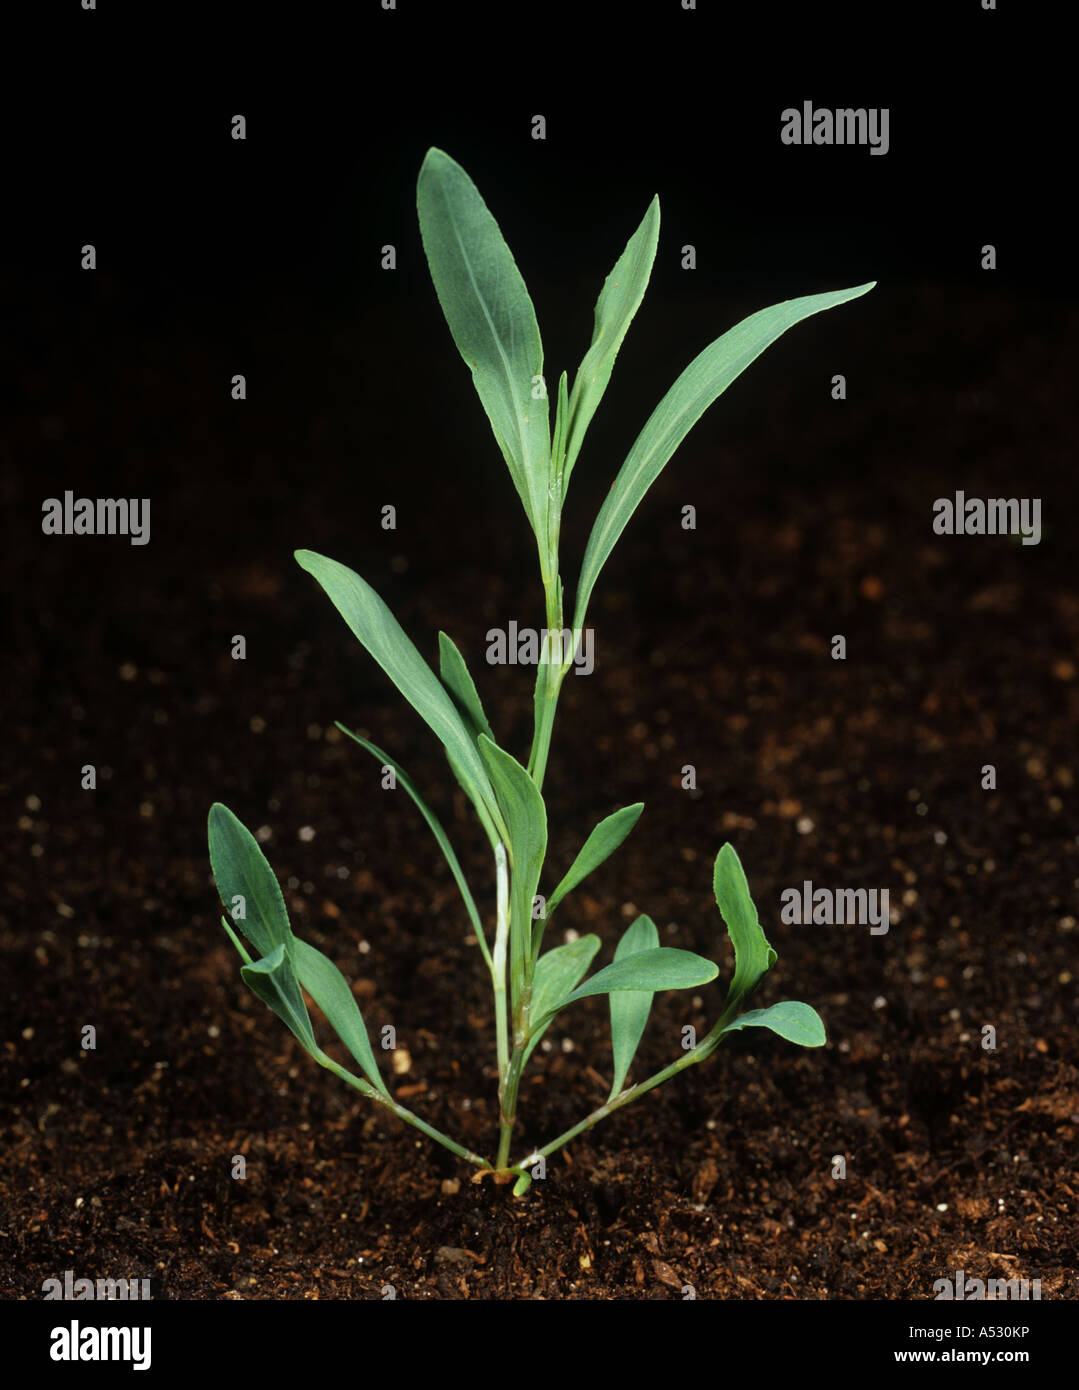 Knotgrass Polygonum aviculare young plant on soil black background Stock Photo